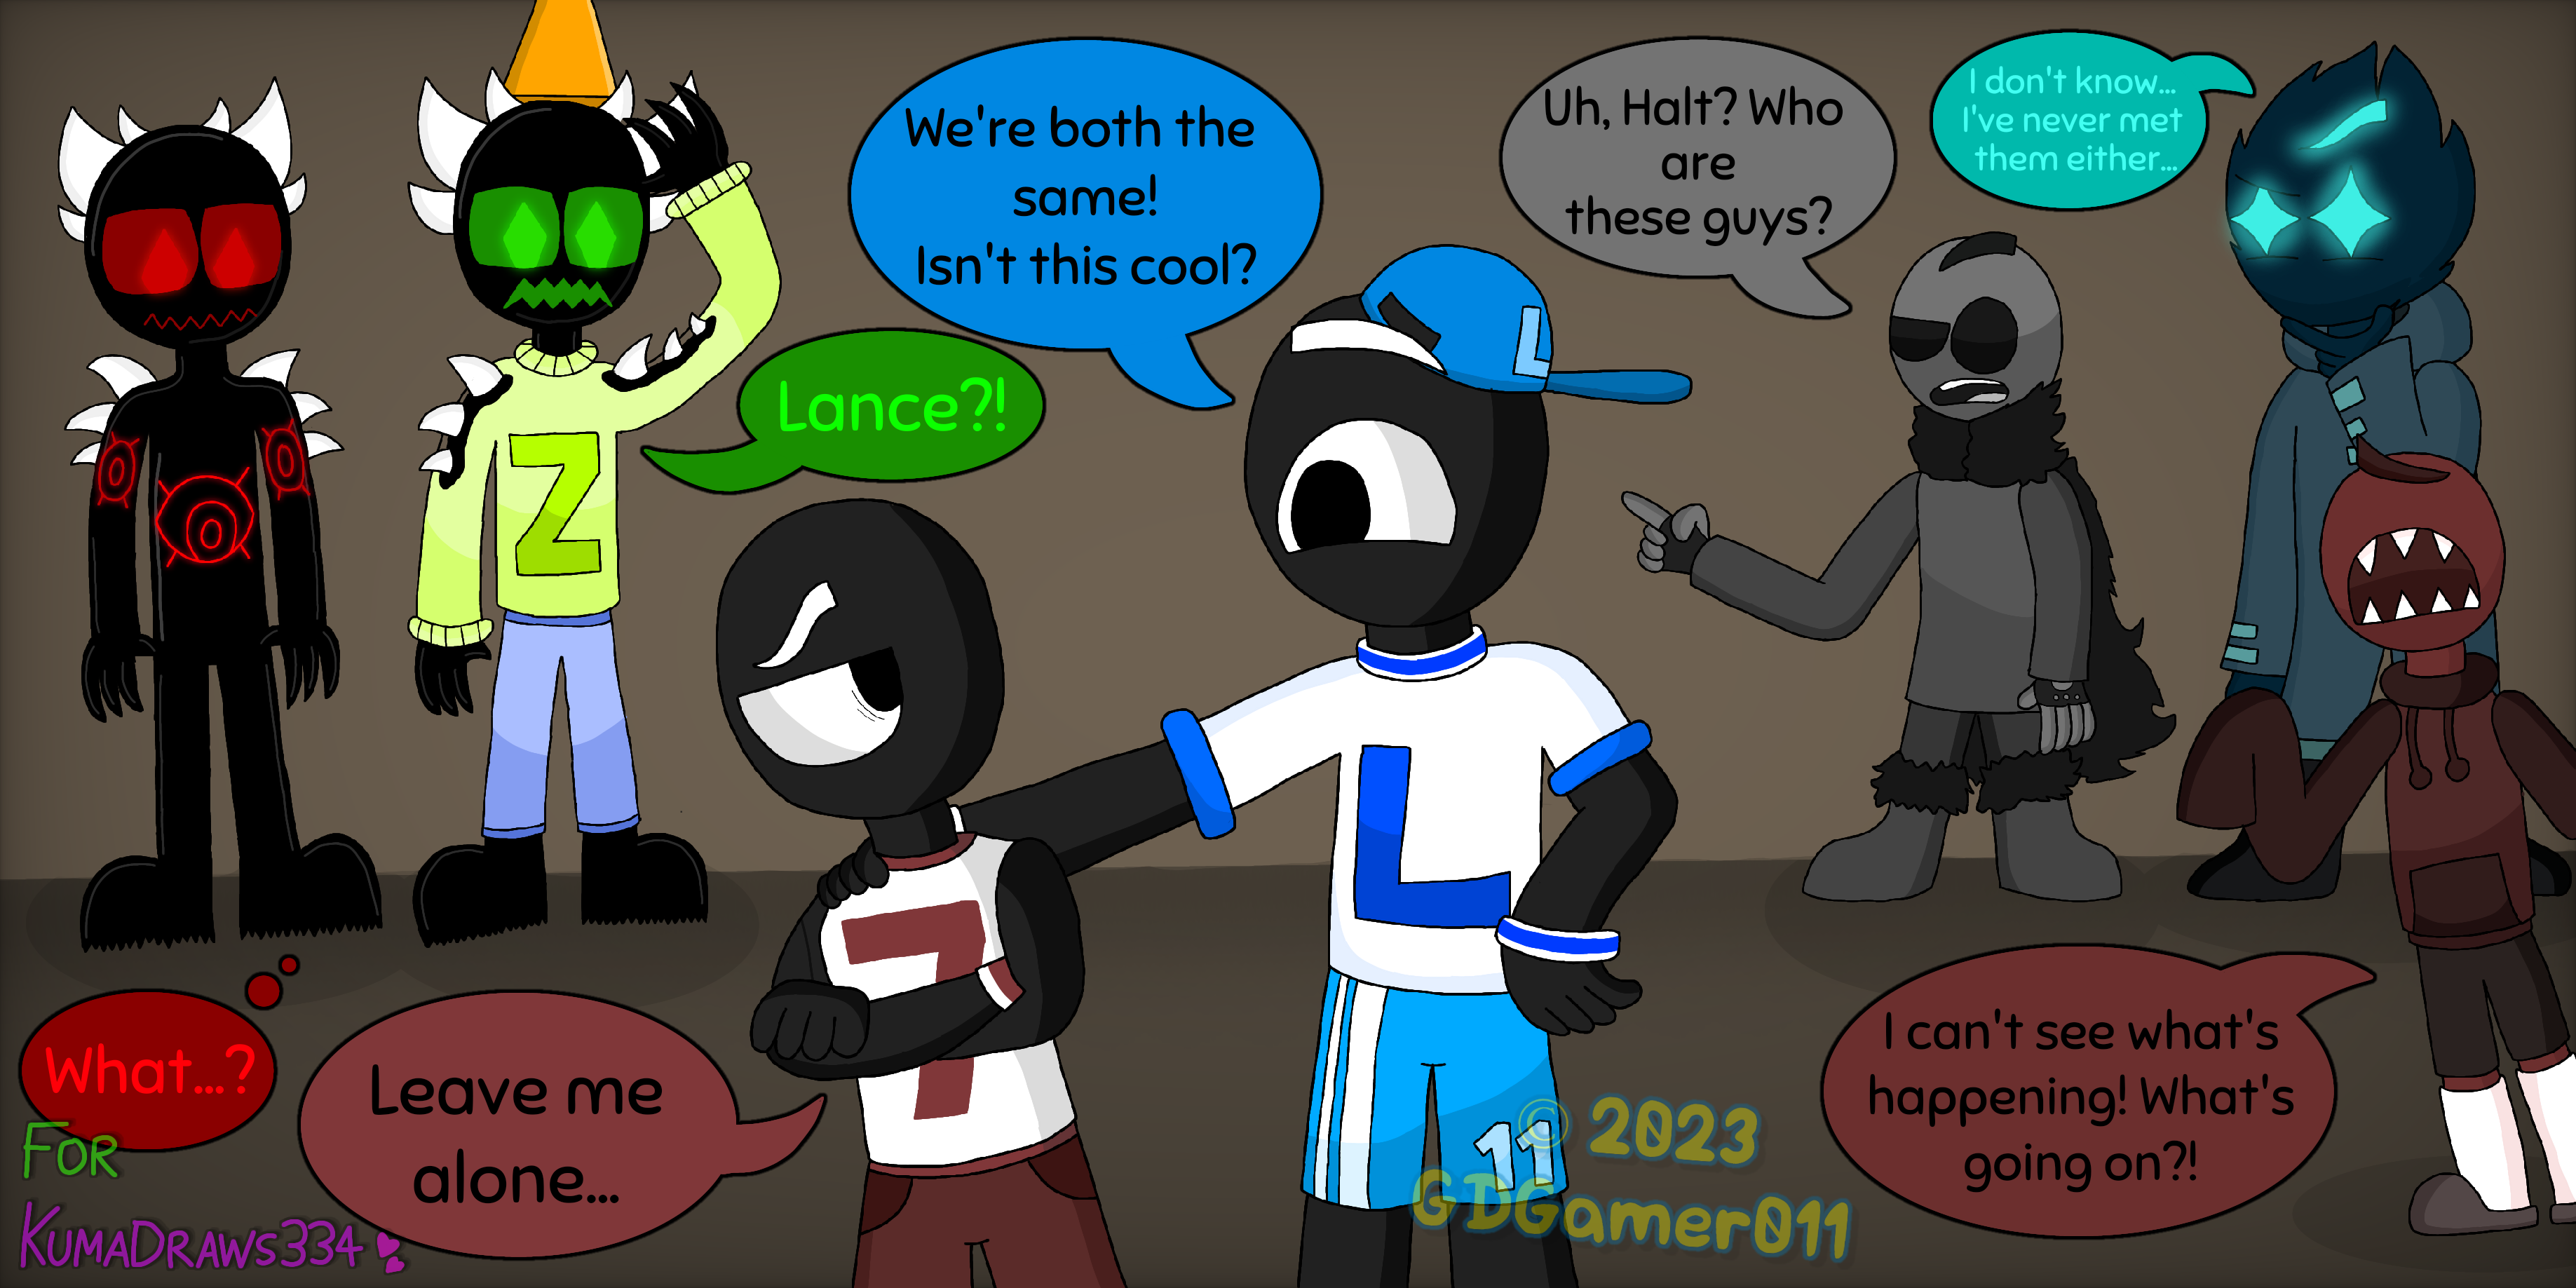 Epic Roblox Avatar (kill me) by cocococo124 on Newgrounds